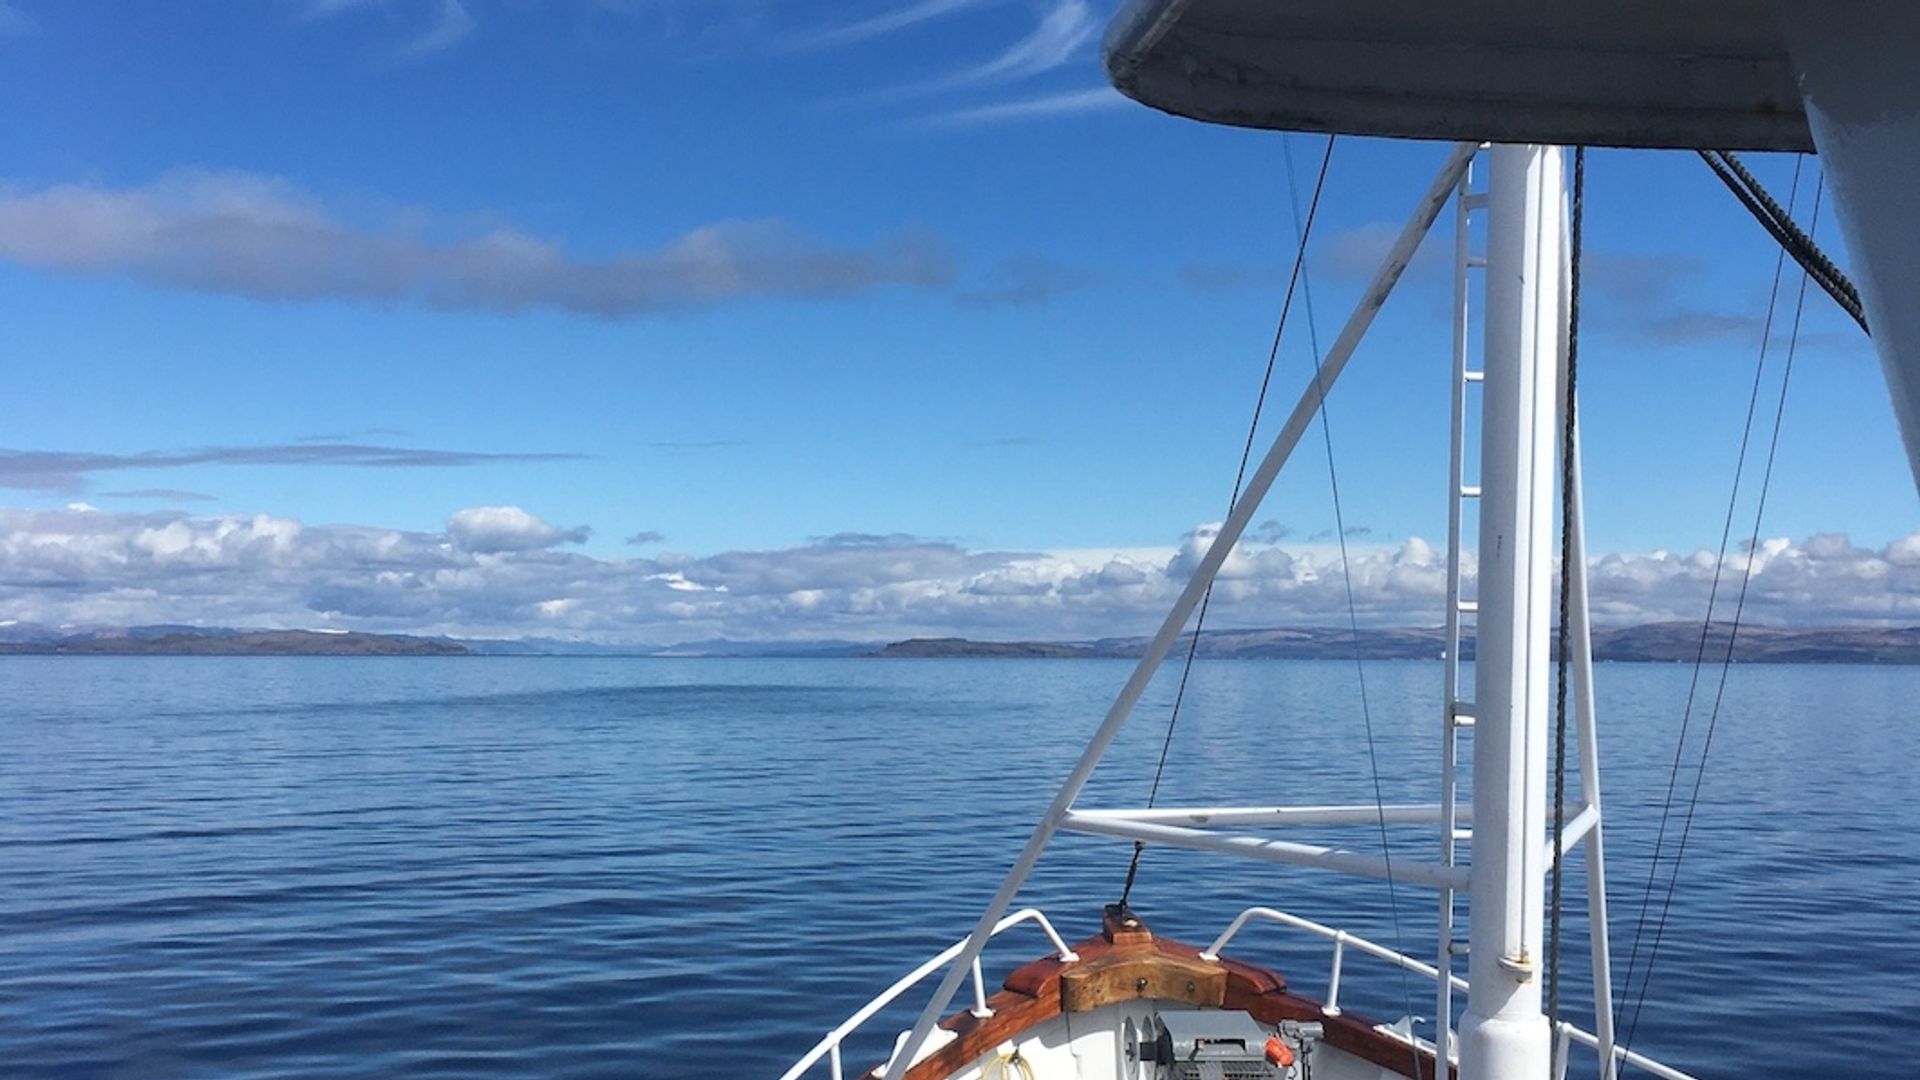 A cruise boat on the Scottish Highlands and Islands